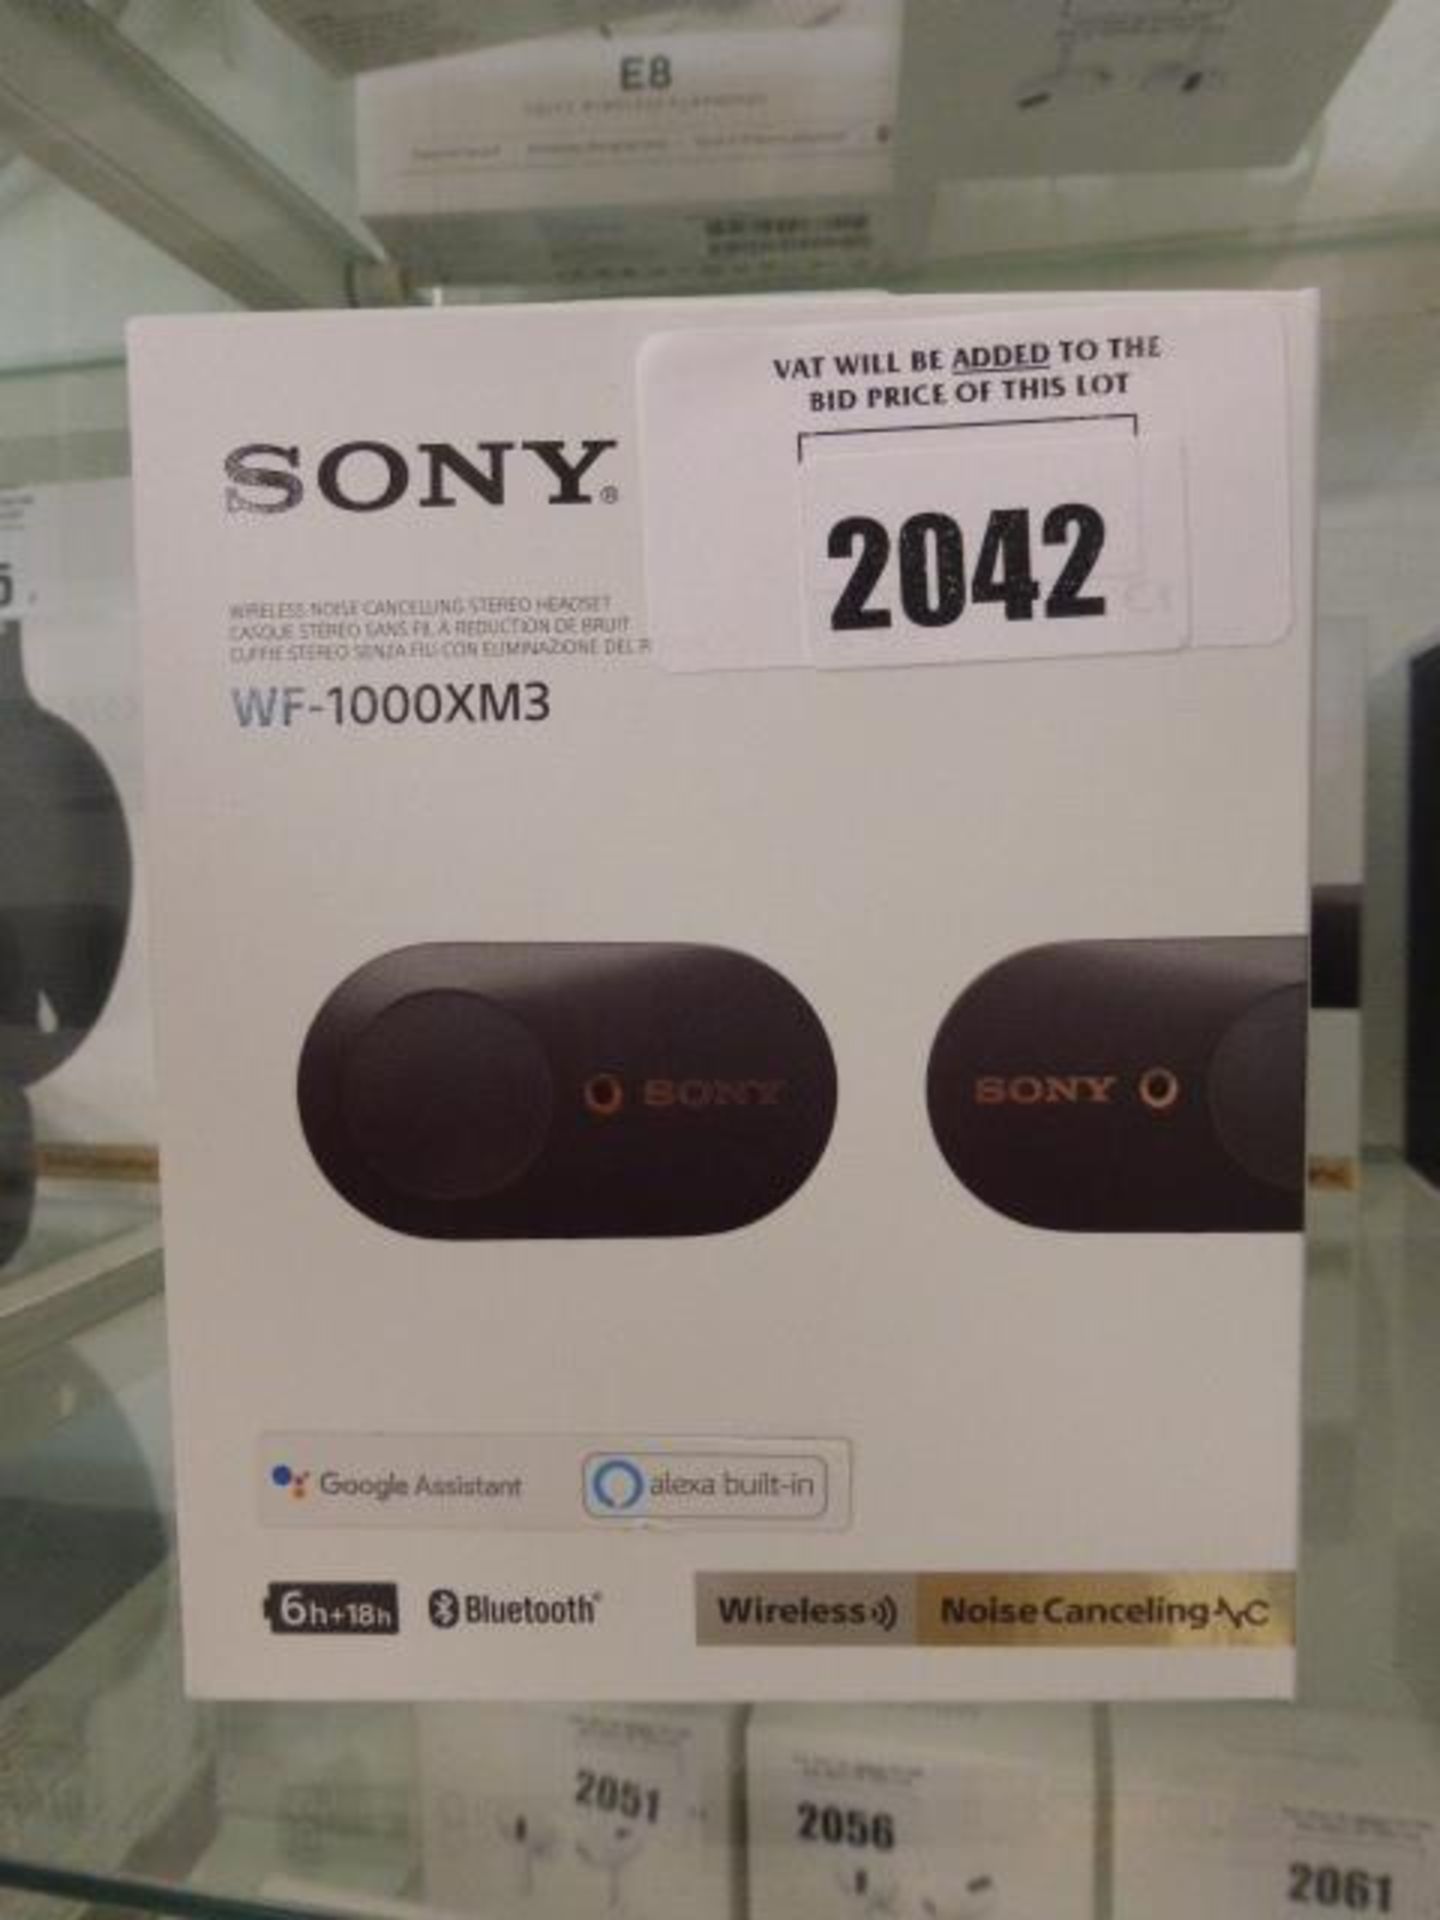 Sony WF-1000XM3 wireless noise cancelling earbuds with charging case and box - Image 2 of 2